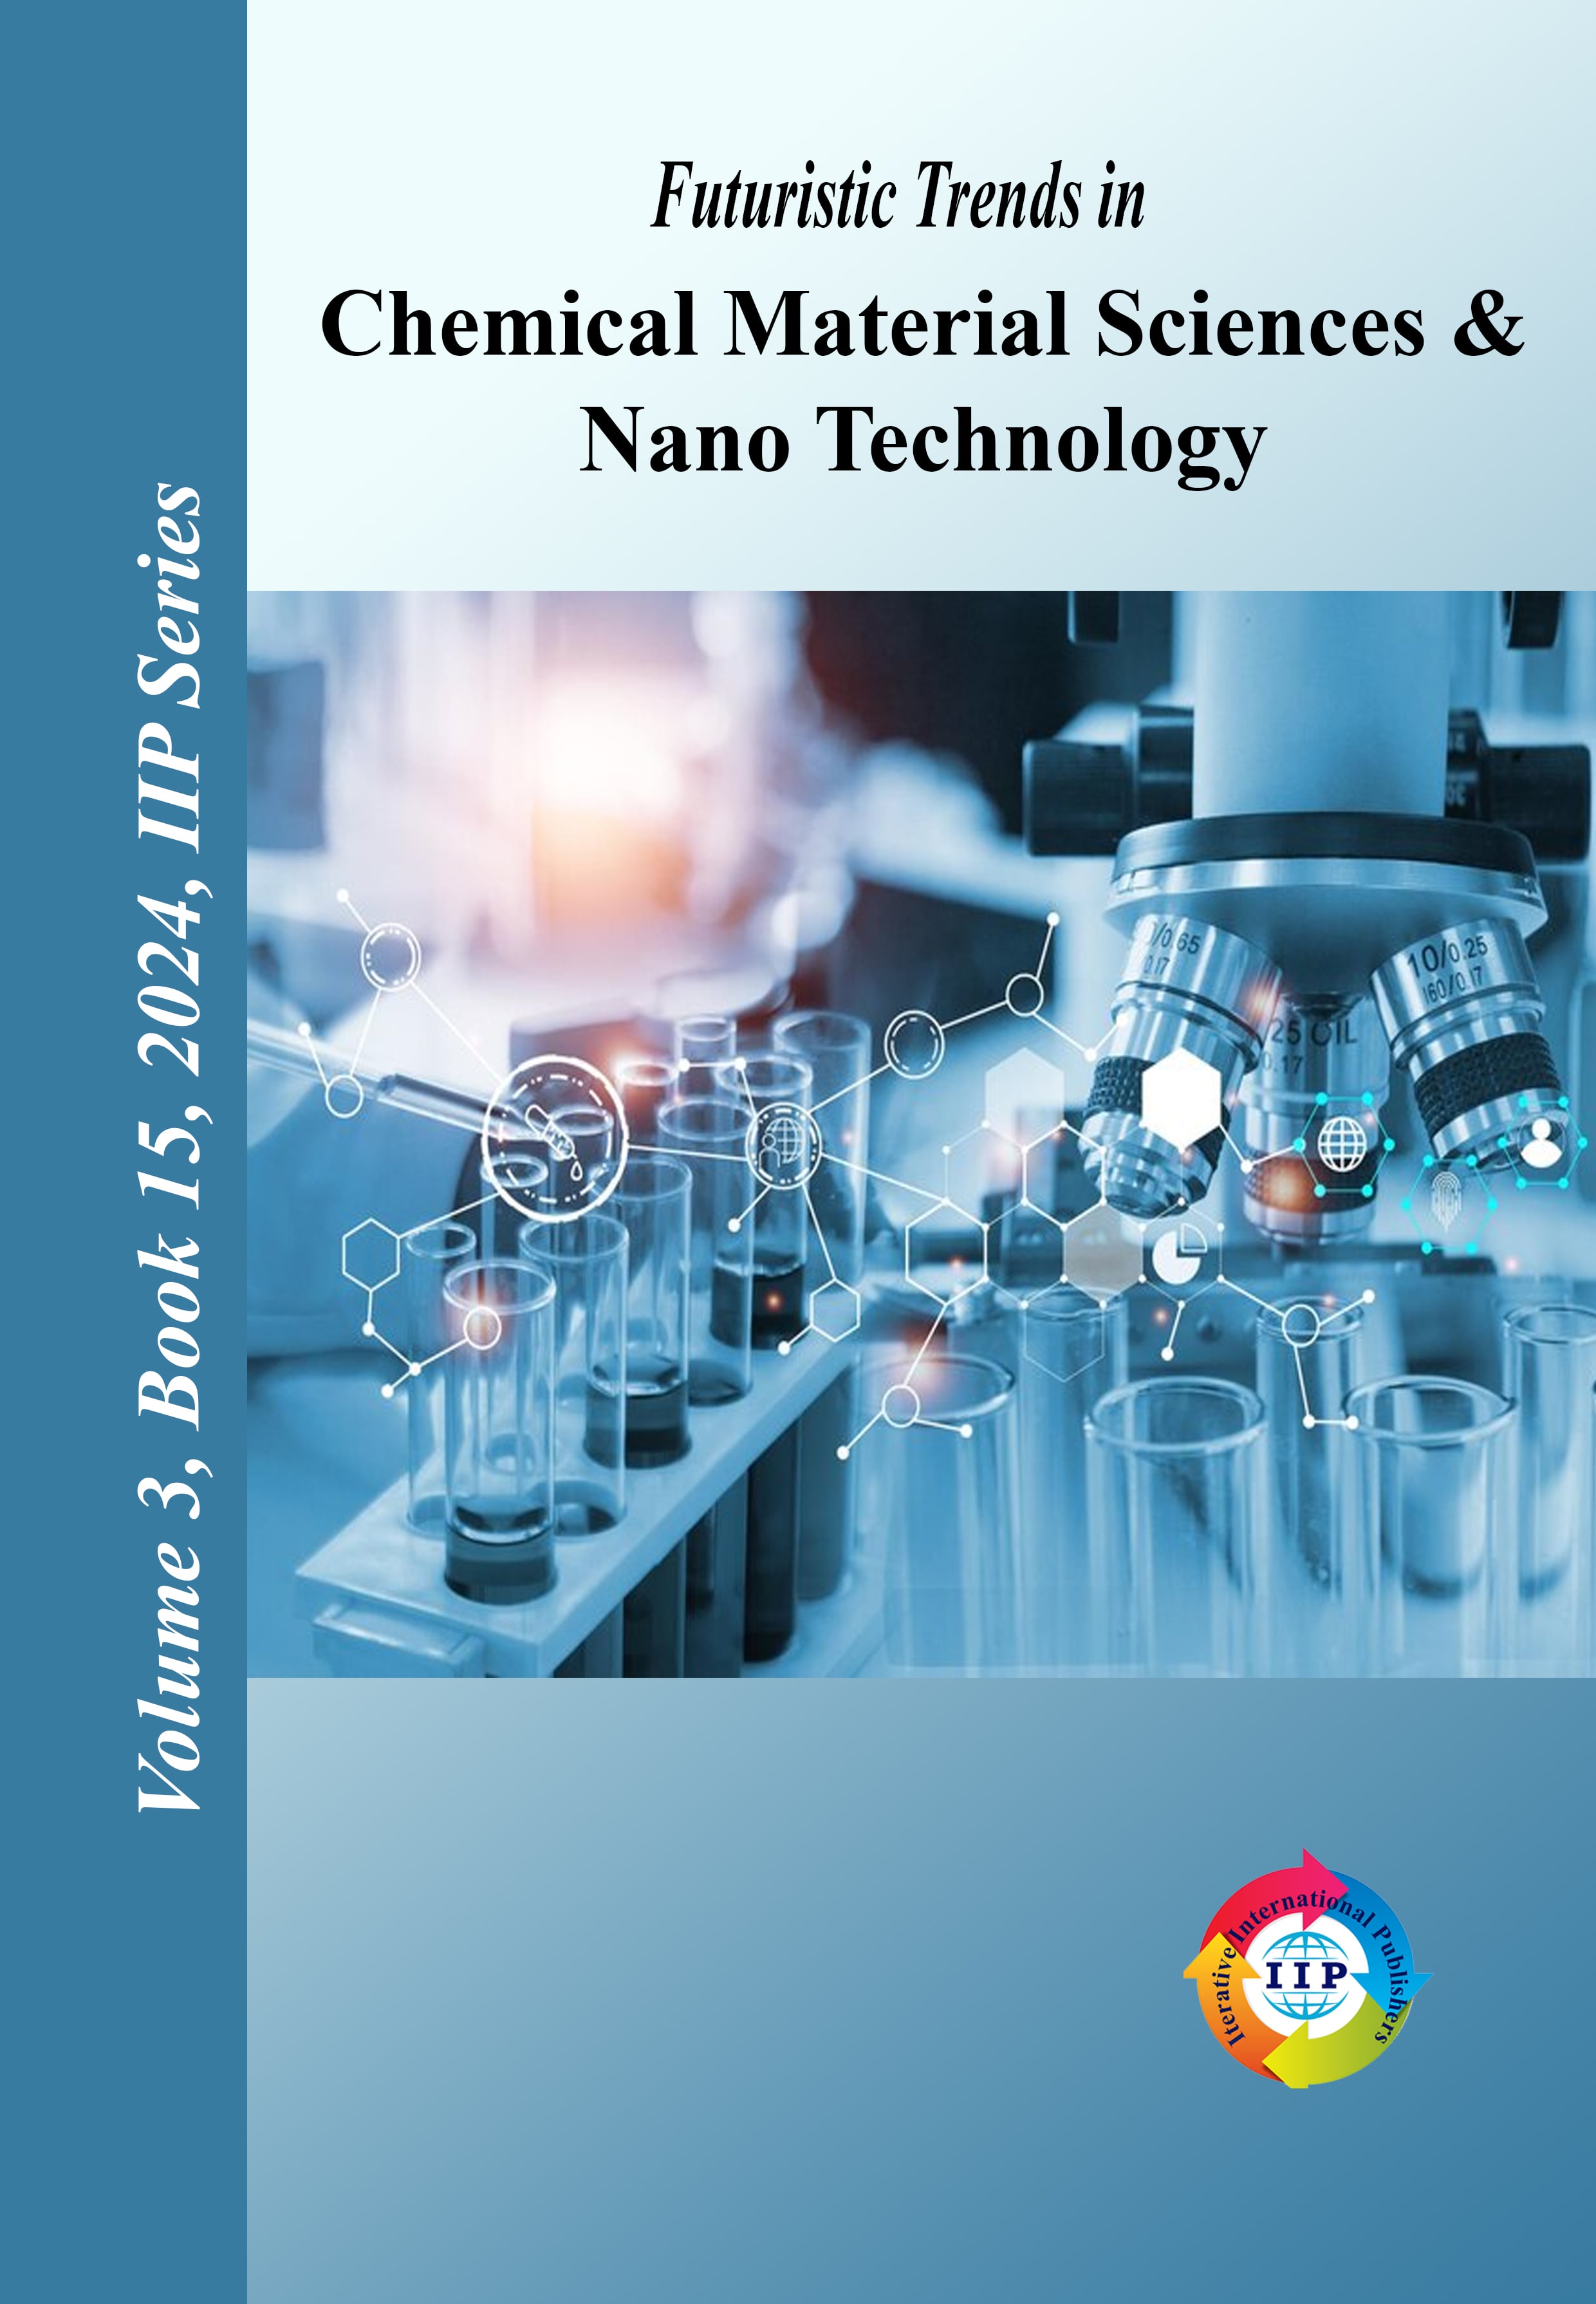 Futuristic Trends in Chemical Material Sciences & Nano Technology  Volume 3 Book 15